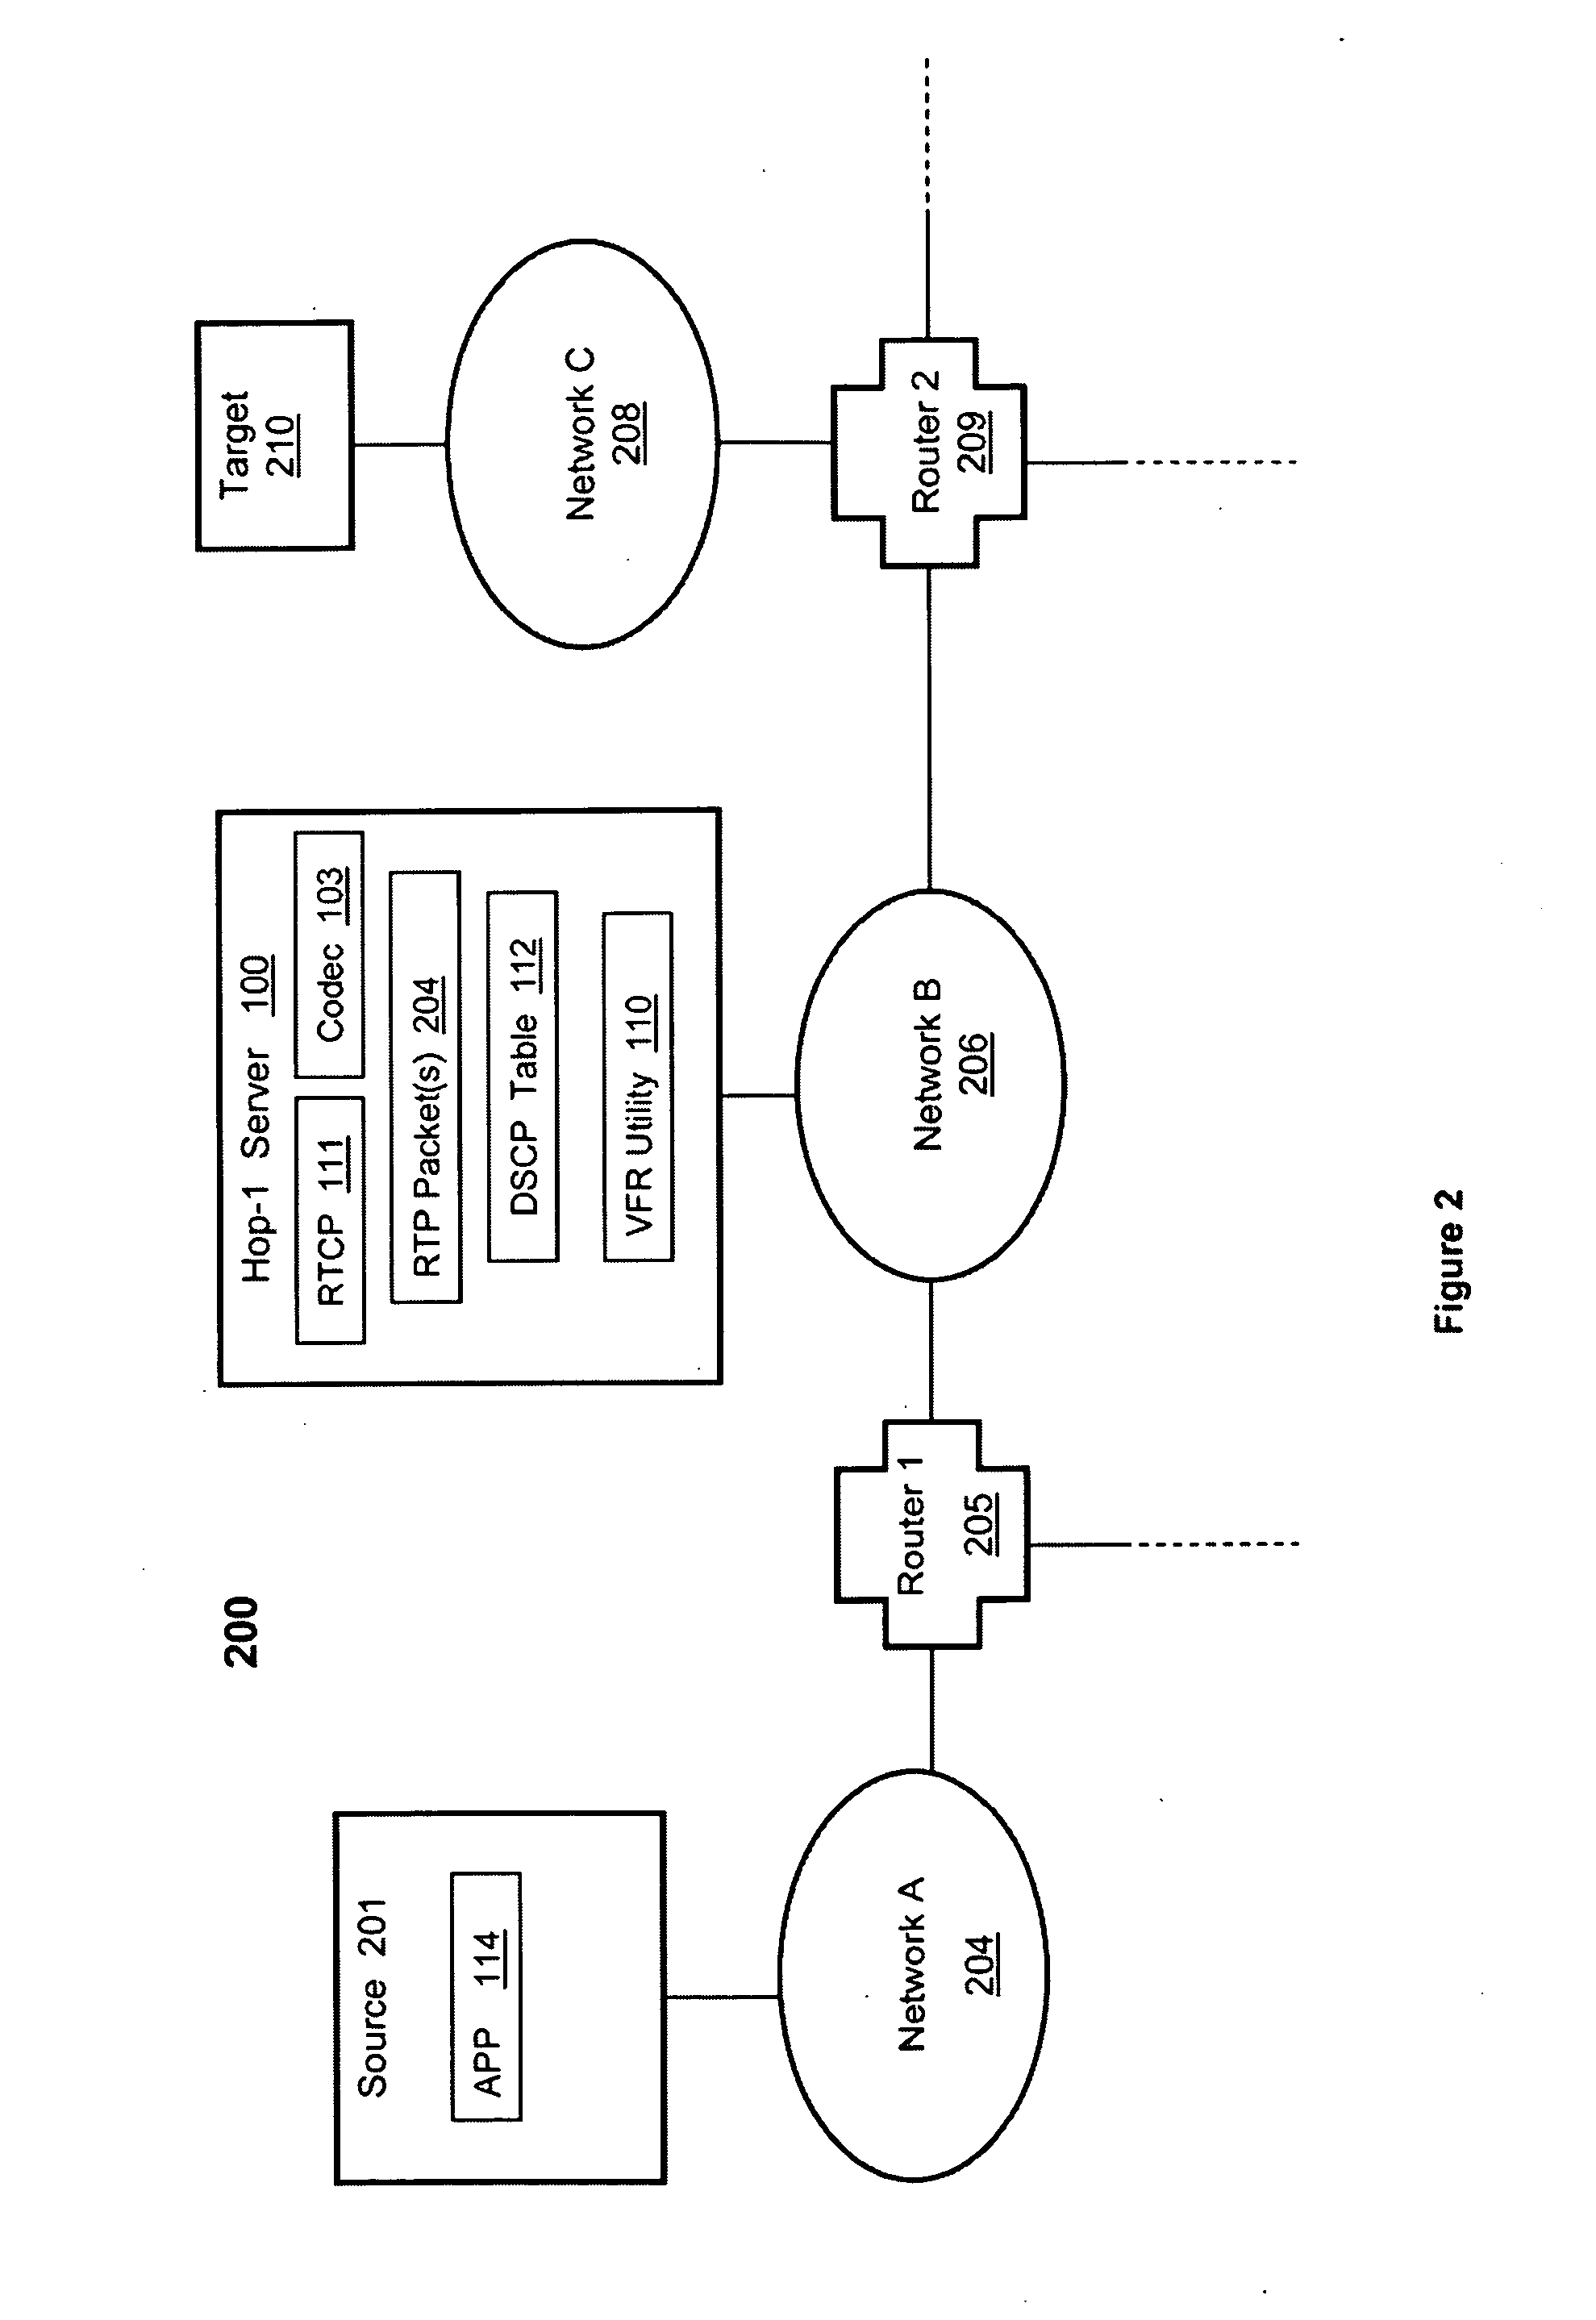 Bi-directional video compression for real-time video streams during transport in a packet switched network